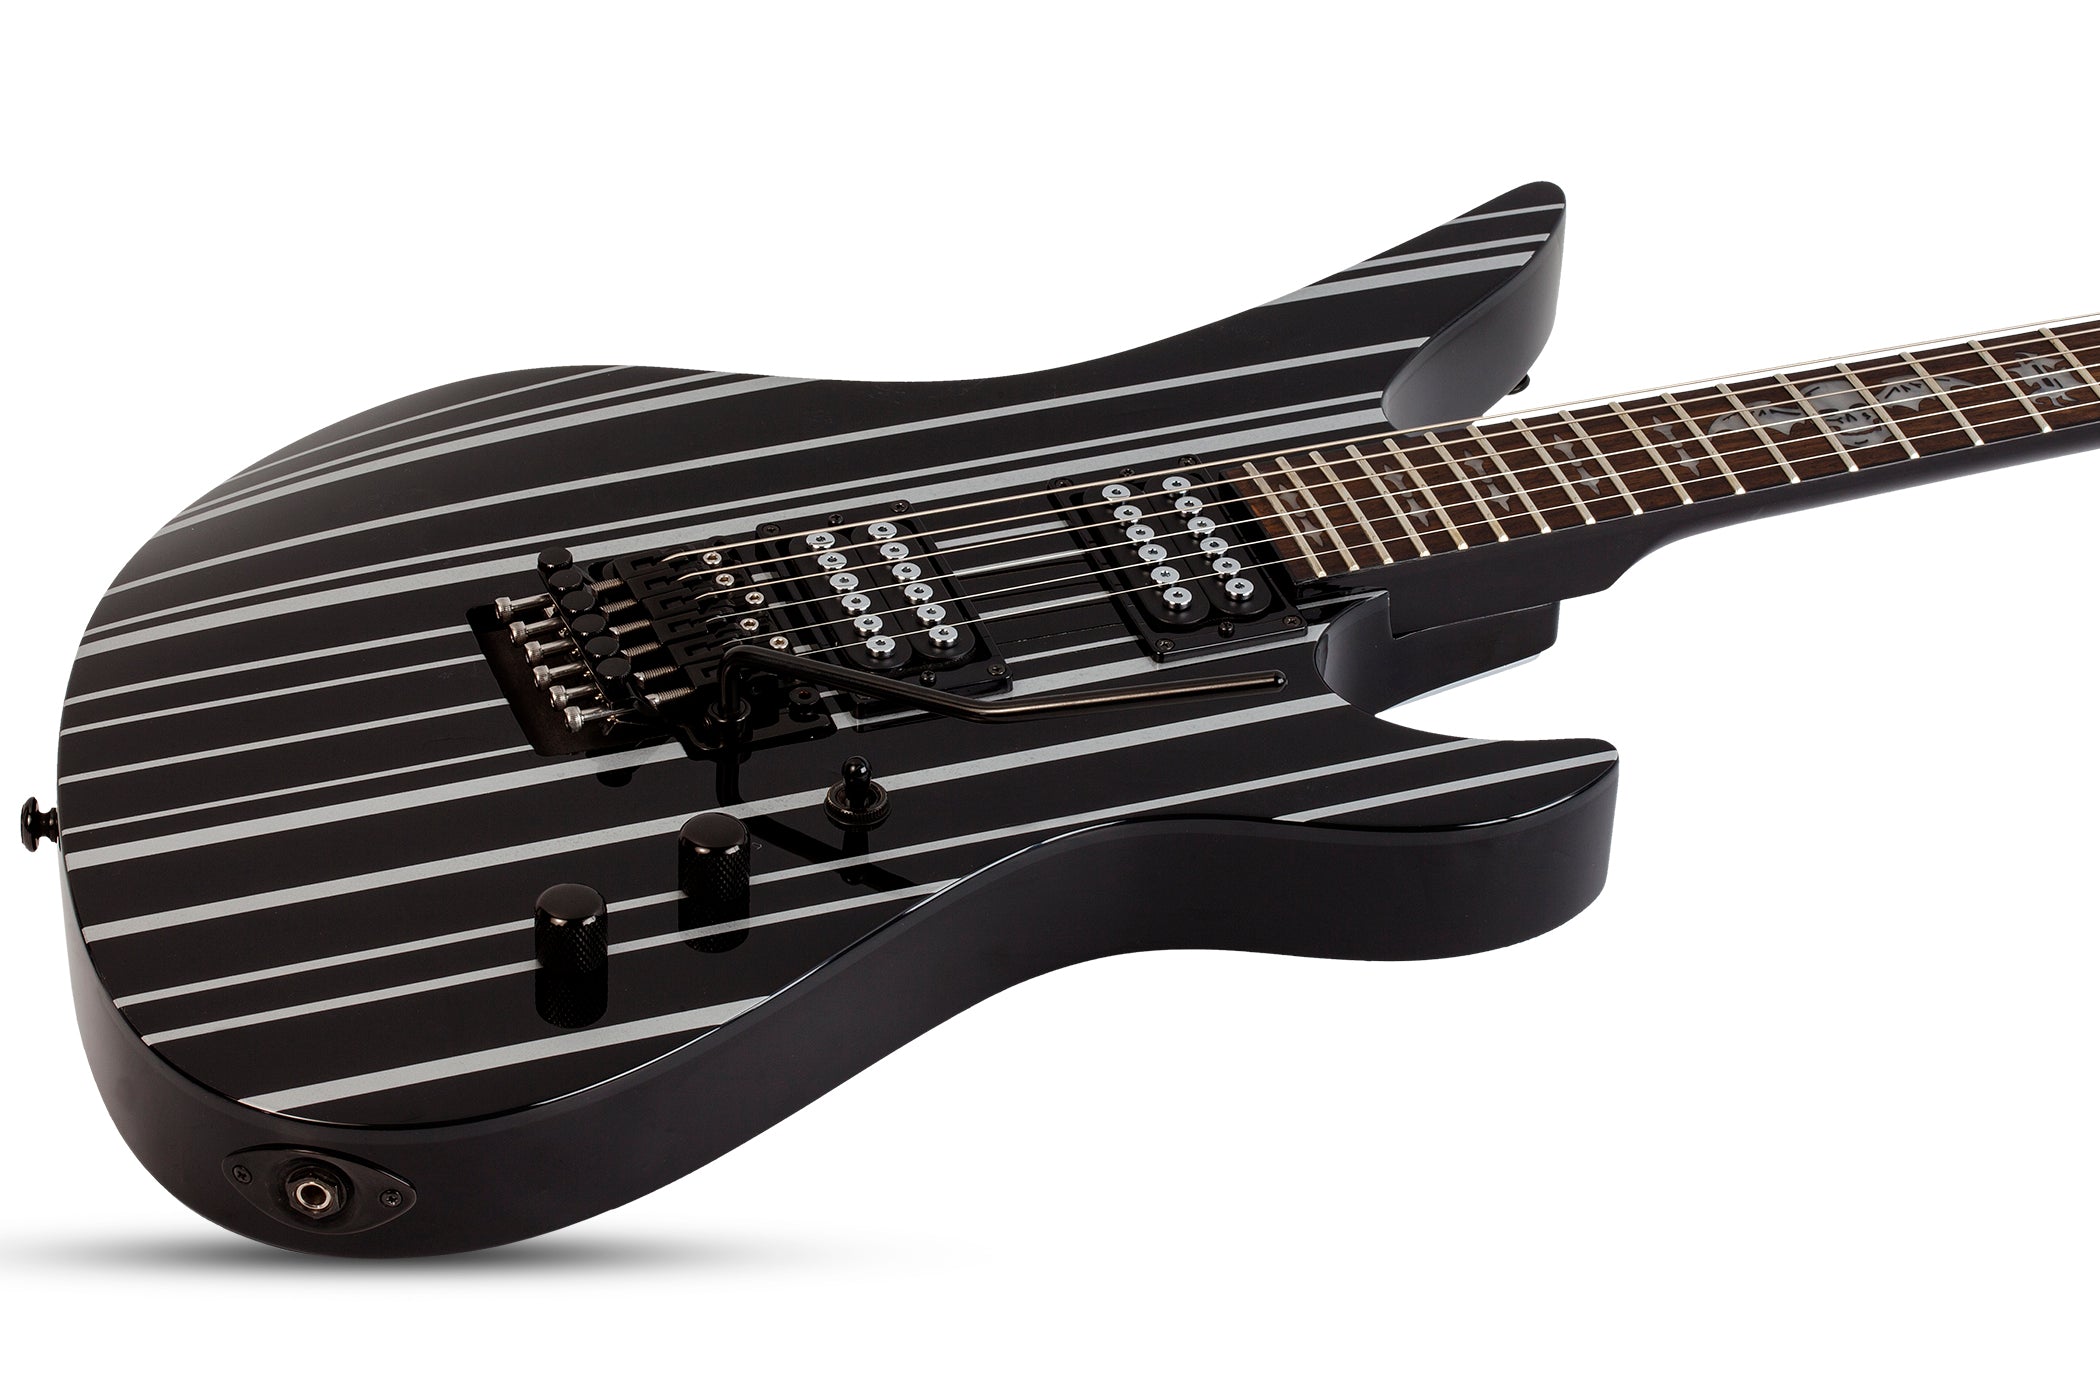 SCHECTER ELECTRIC GUITAR SYNYSTER GATES STANDARD GLOSS BLACK WITH SILVER PINSTRIPES (1739) MADE IN INDONESIA, SCHECTER, ELECTRIC GUITAR, schecter-electric-guitar-synstd-gbsp, ZOSO MUSIC SDN BHD